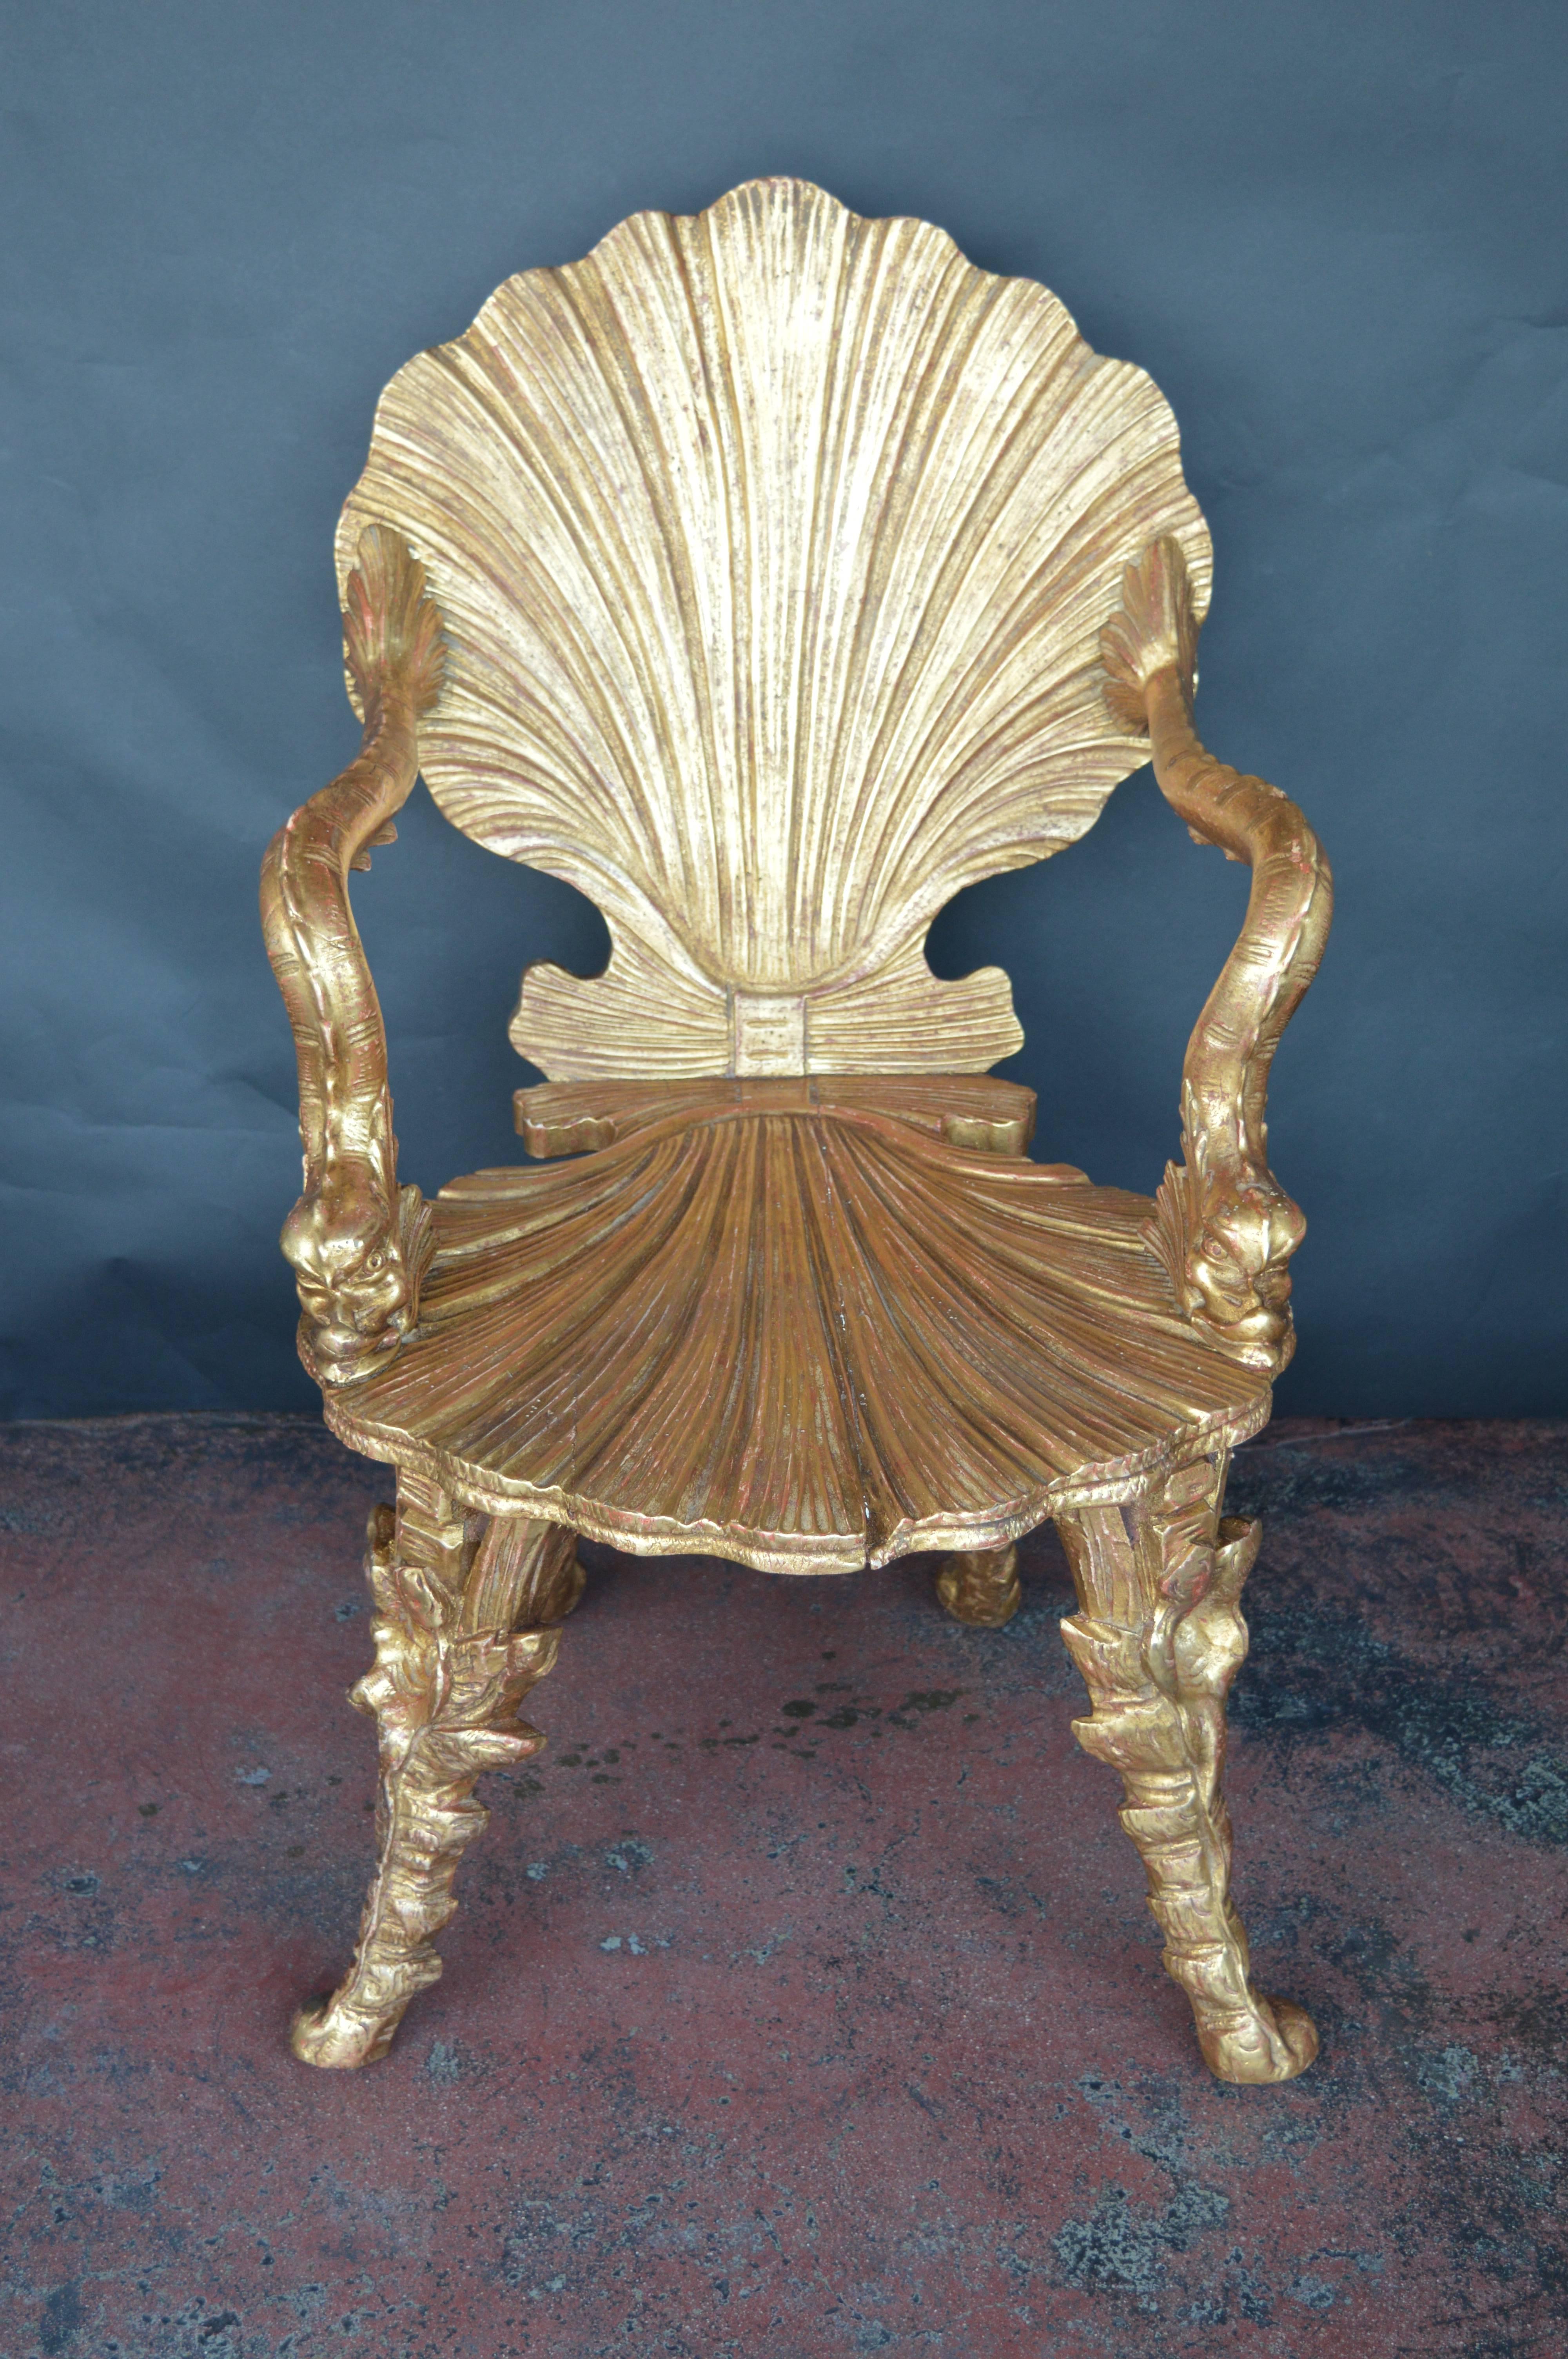 Two giltwood Grotto chairs. The chairs are not a pair, the chair on the left is shorter.

Left chair measurements: 32